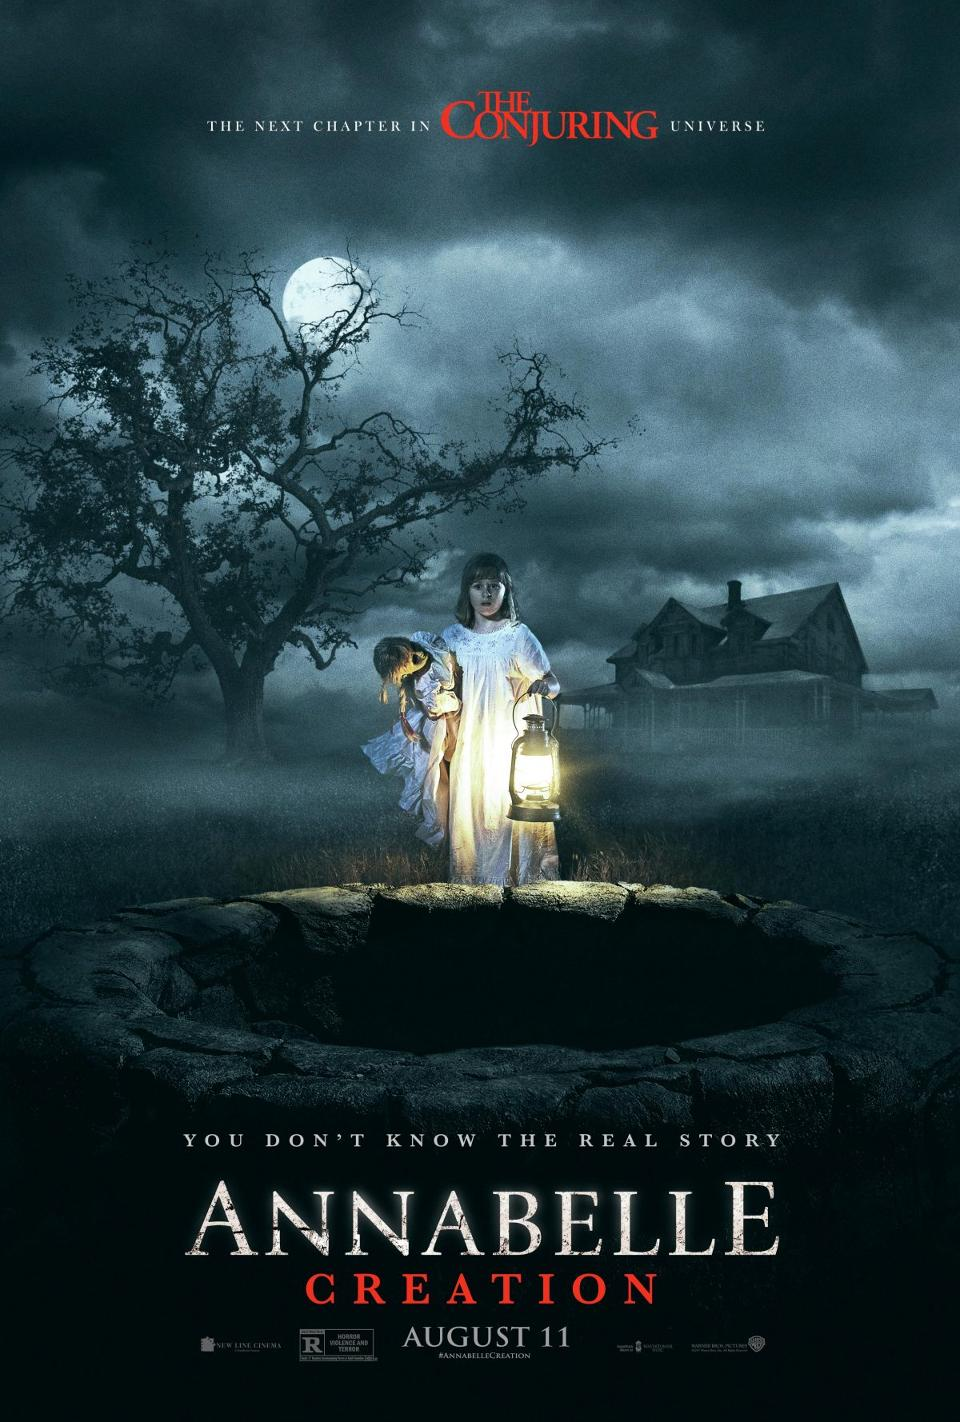 ‘Annabelle: Creation’ is believable and interesting even when it gets predictable